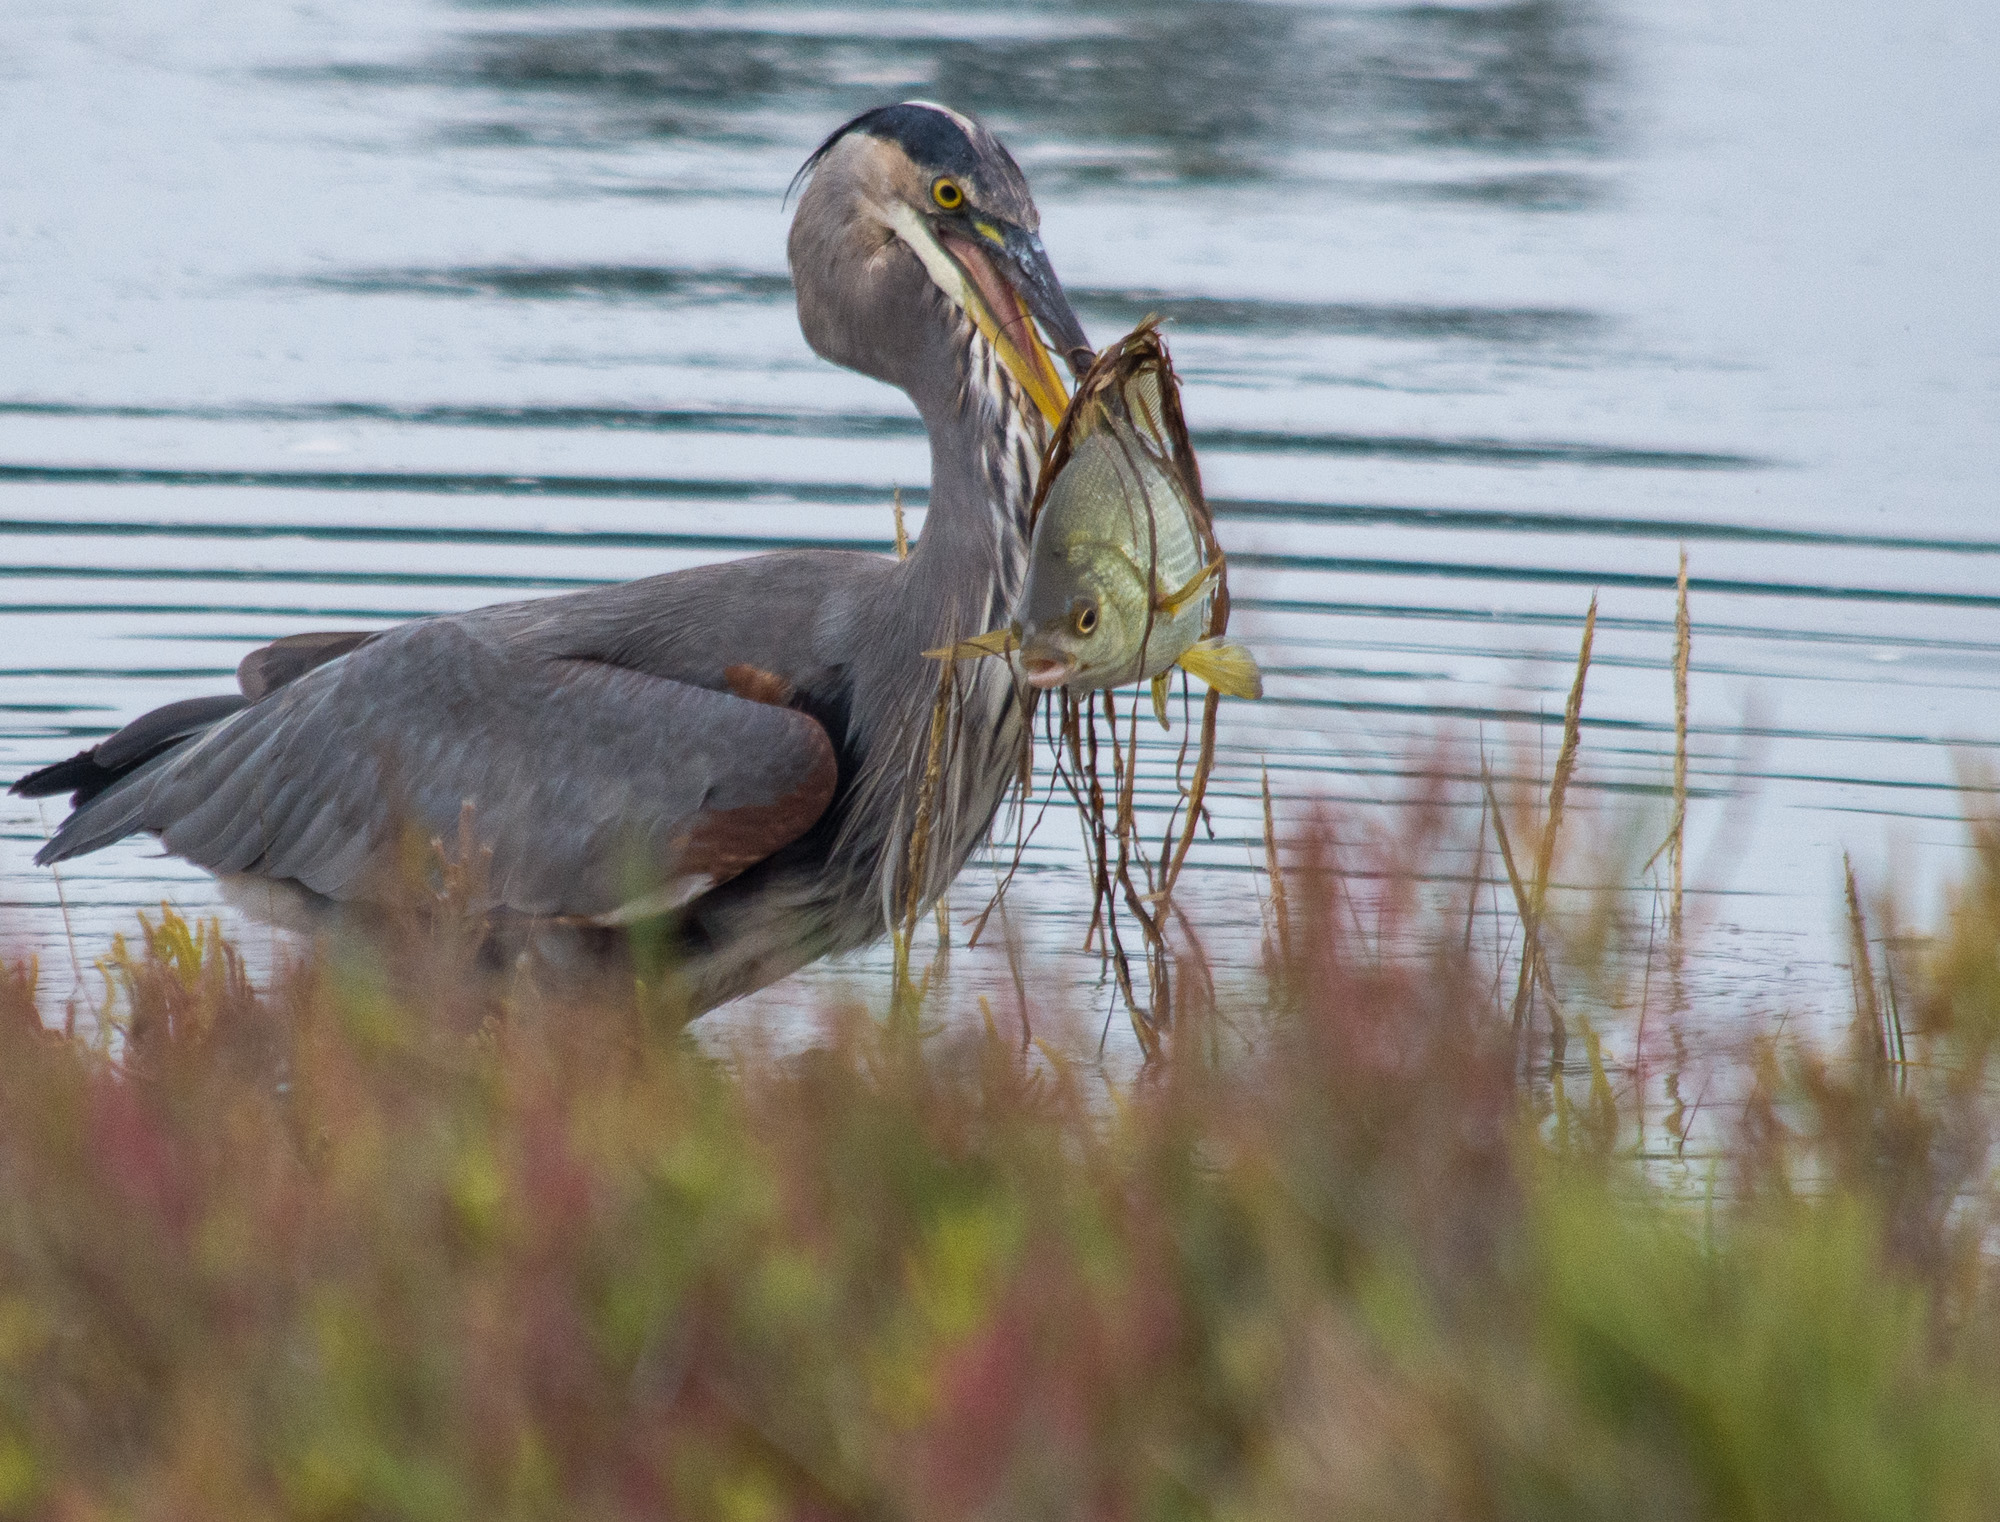 Score! At Bataquitos Lagoon, this blue heron plucks breakfast from the water.